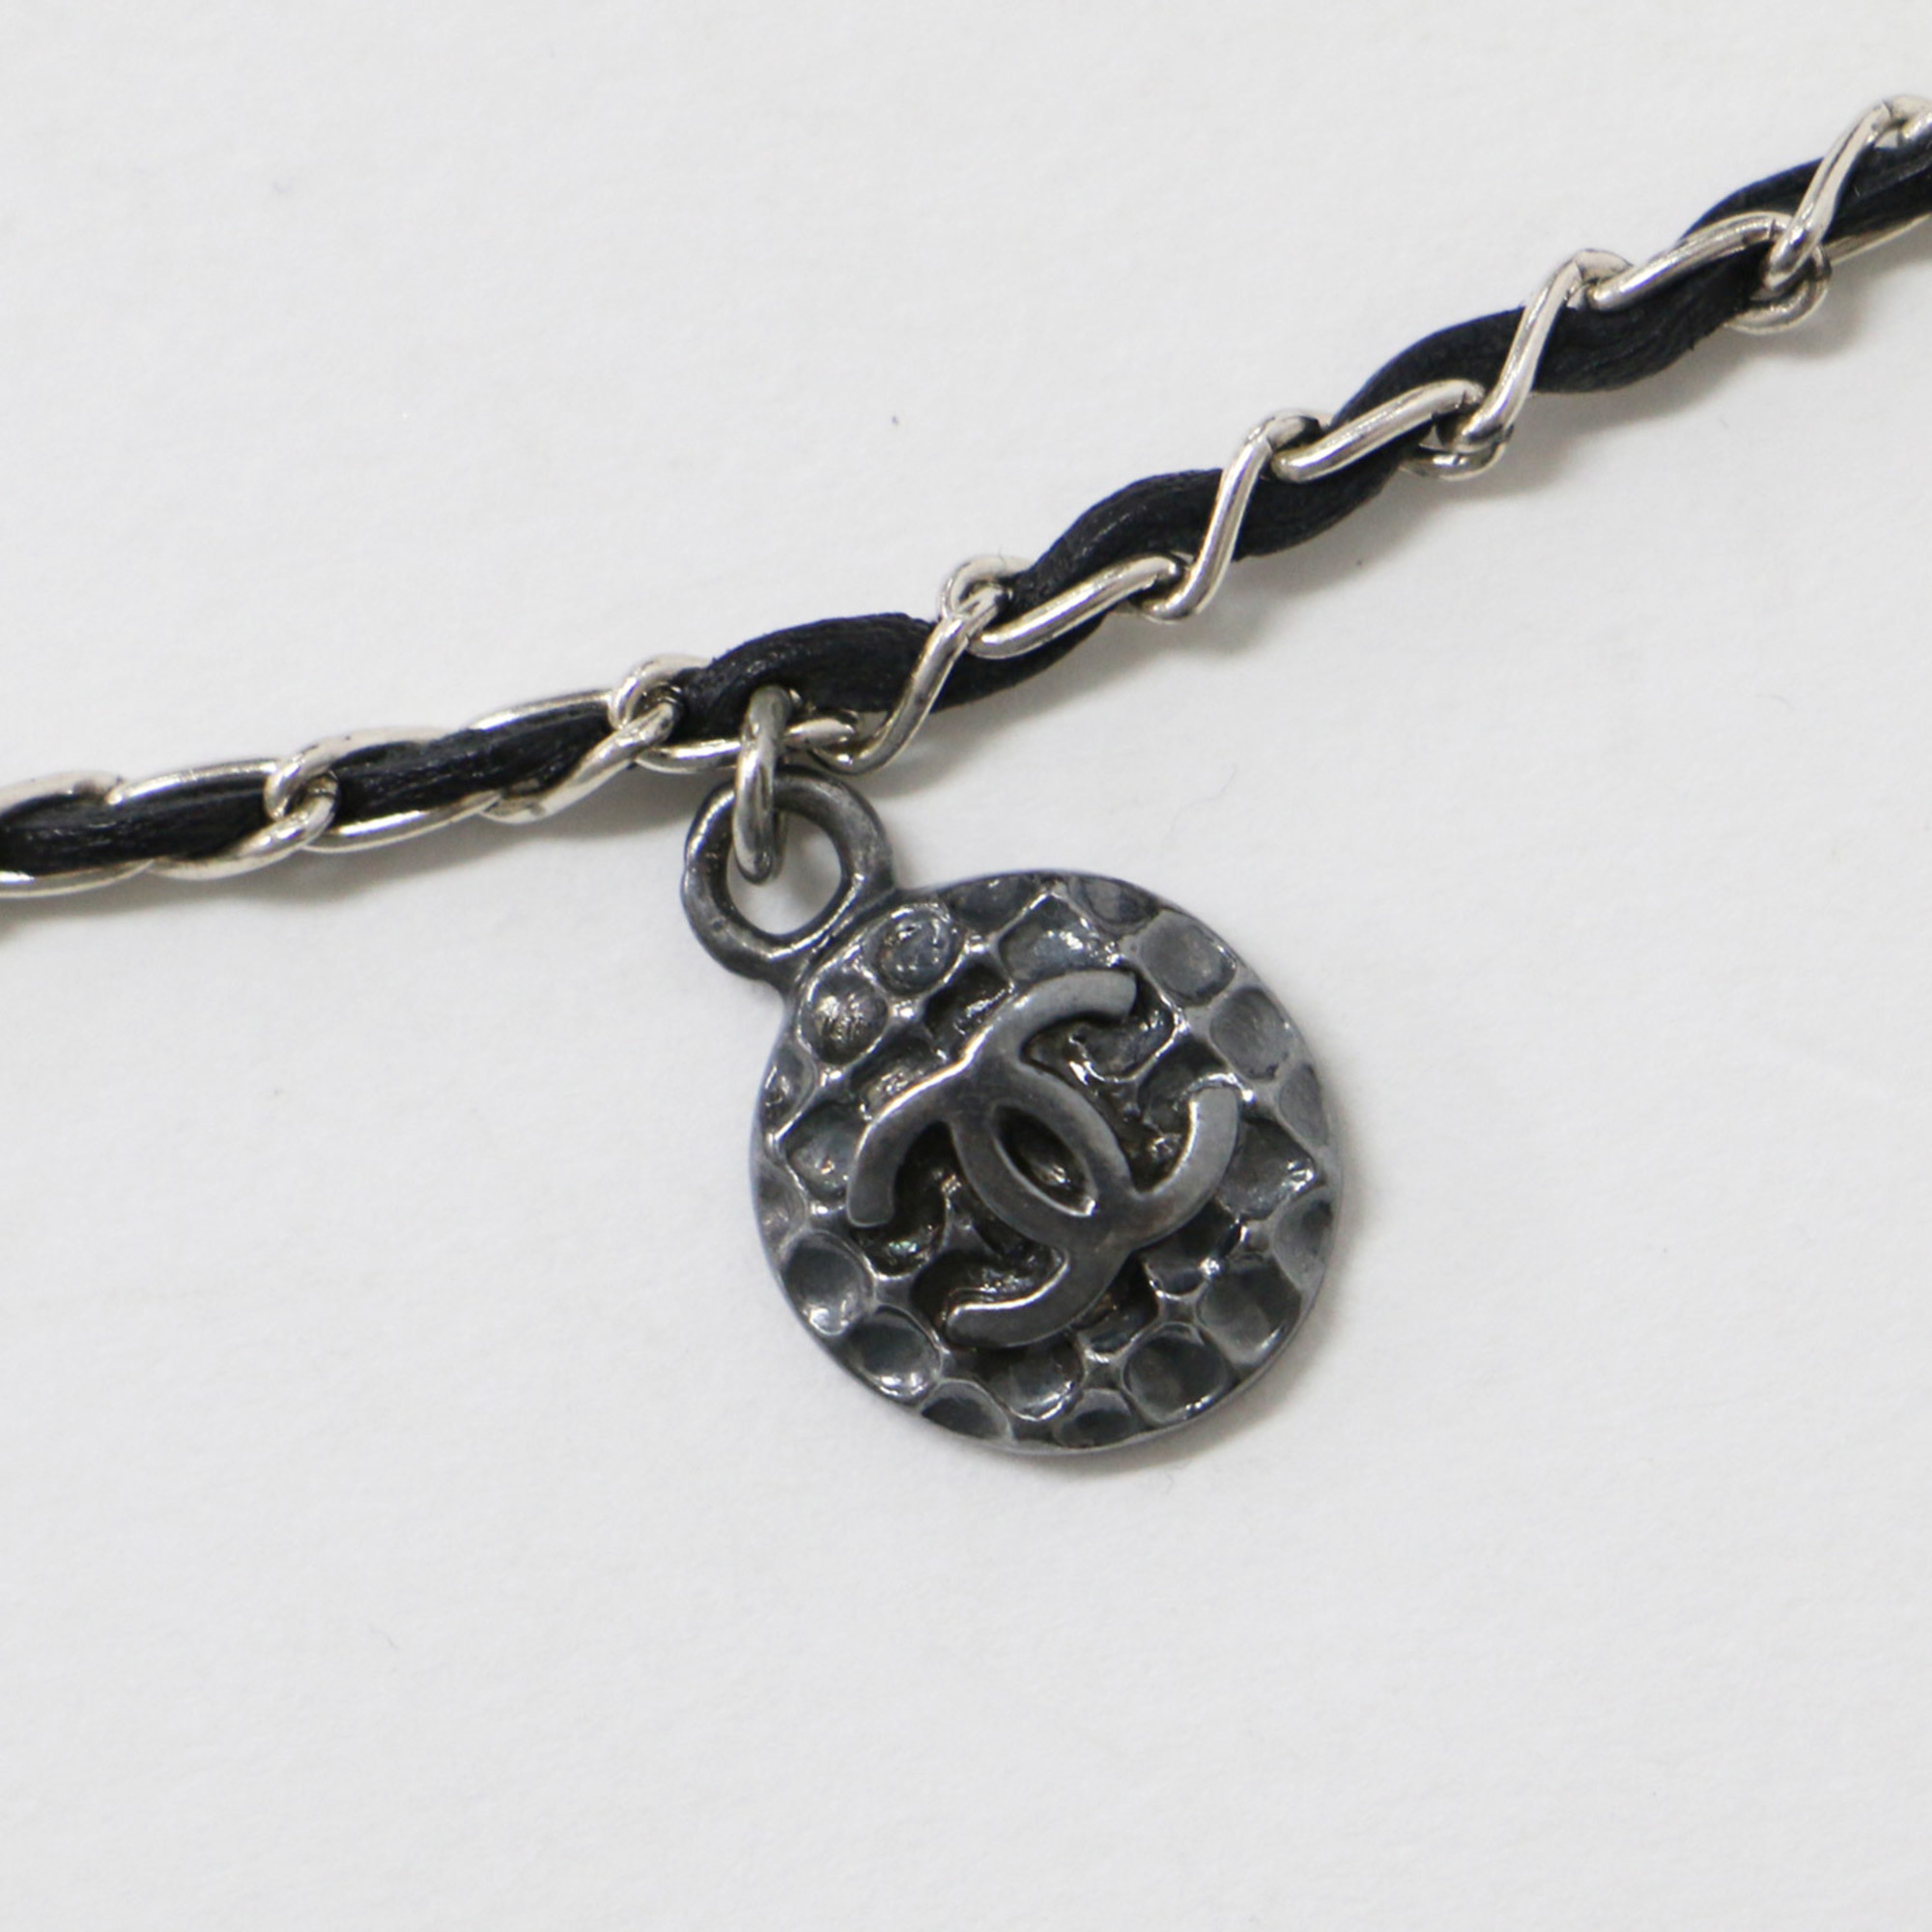 CHANEL Necklace Charm Here Mark Camellia Clover Coin Chain Leather 96P VINTAGE Silver Black Women's